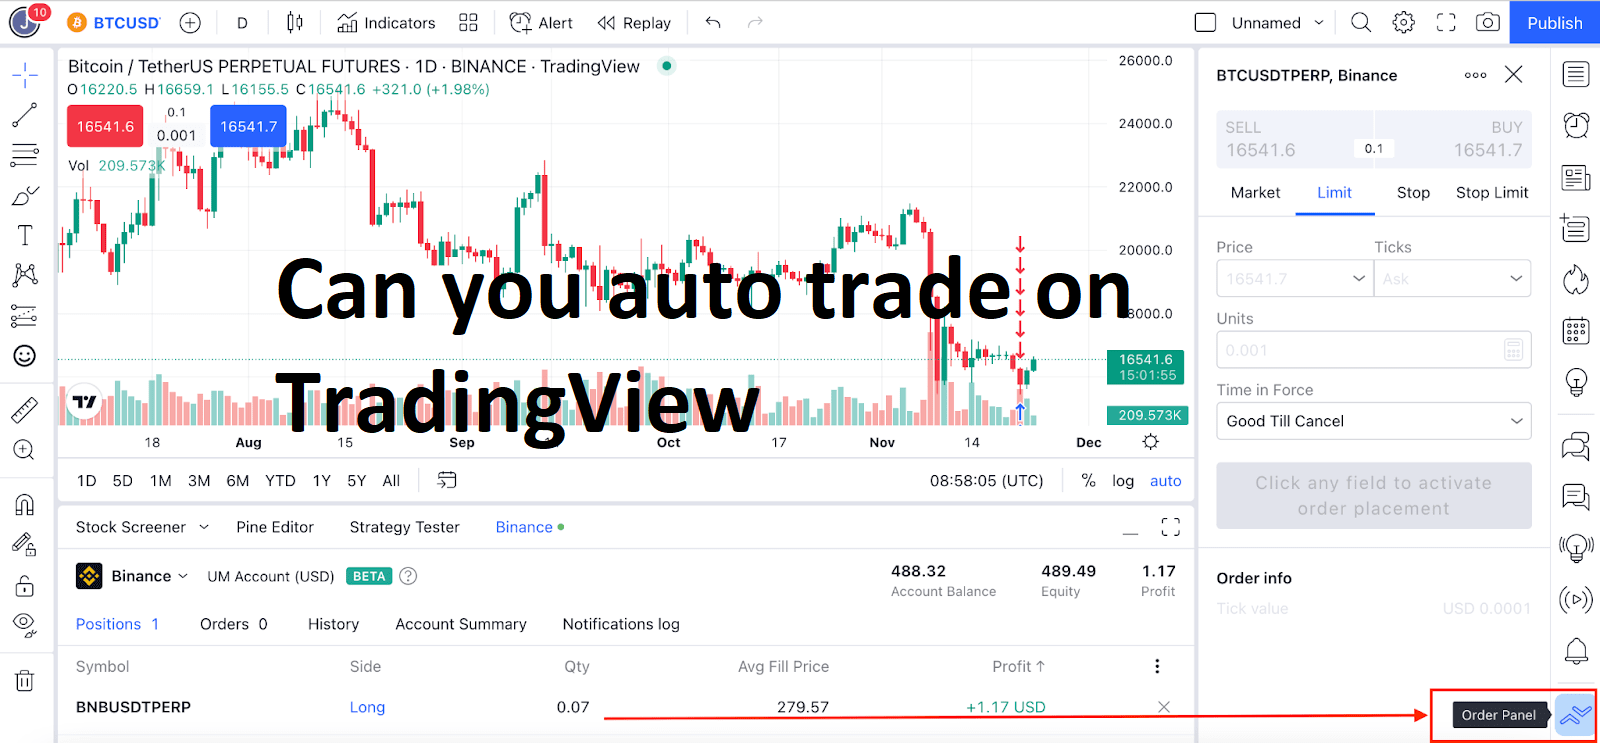 Can you auto trade on TradingView